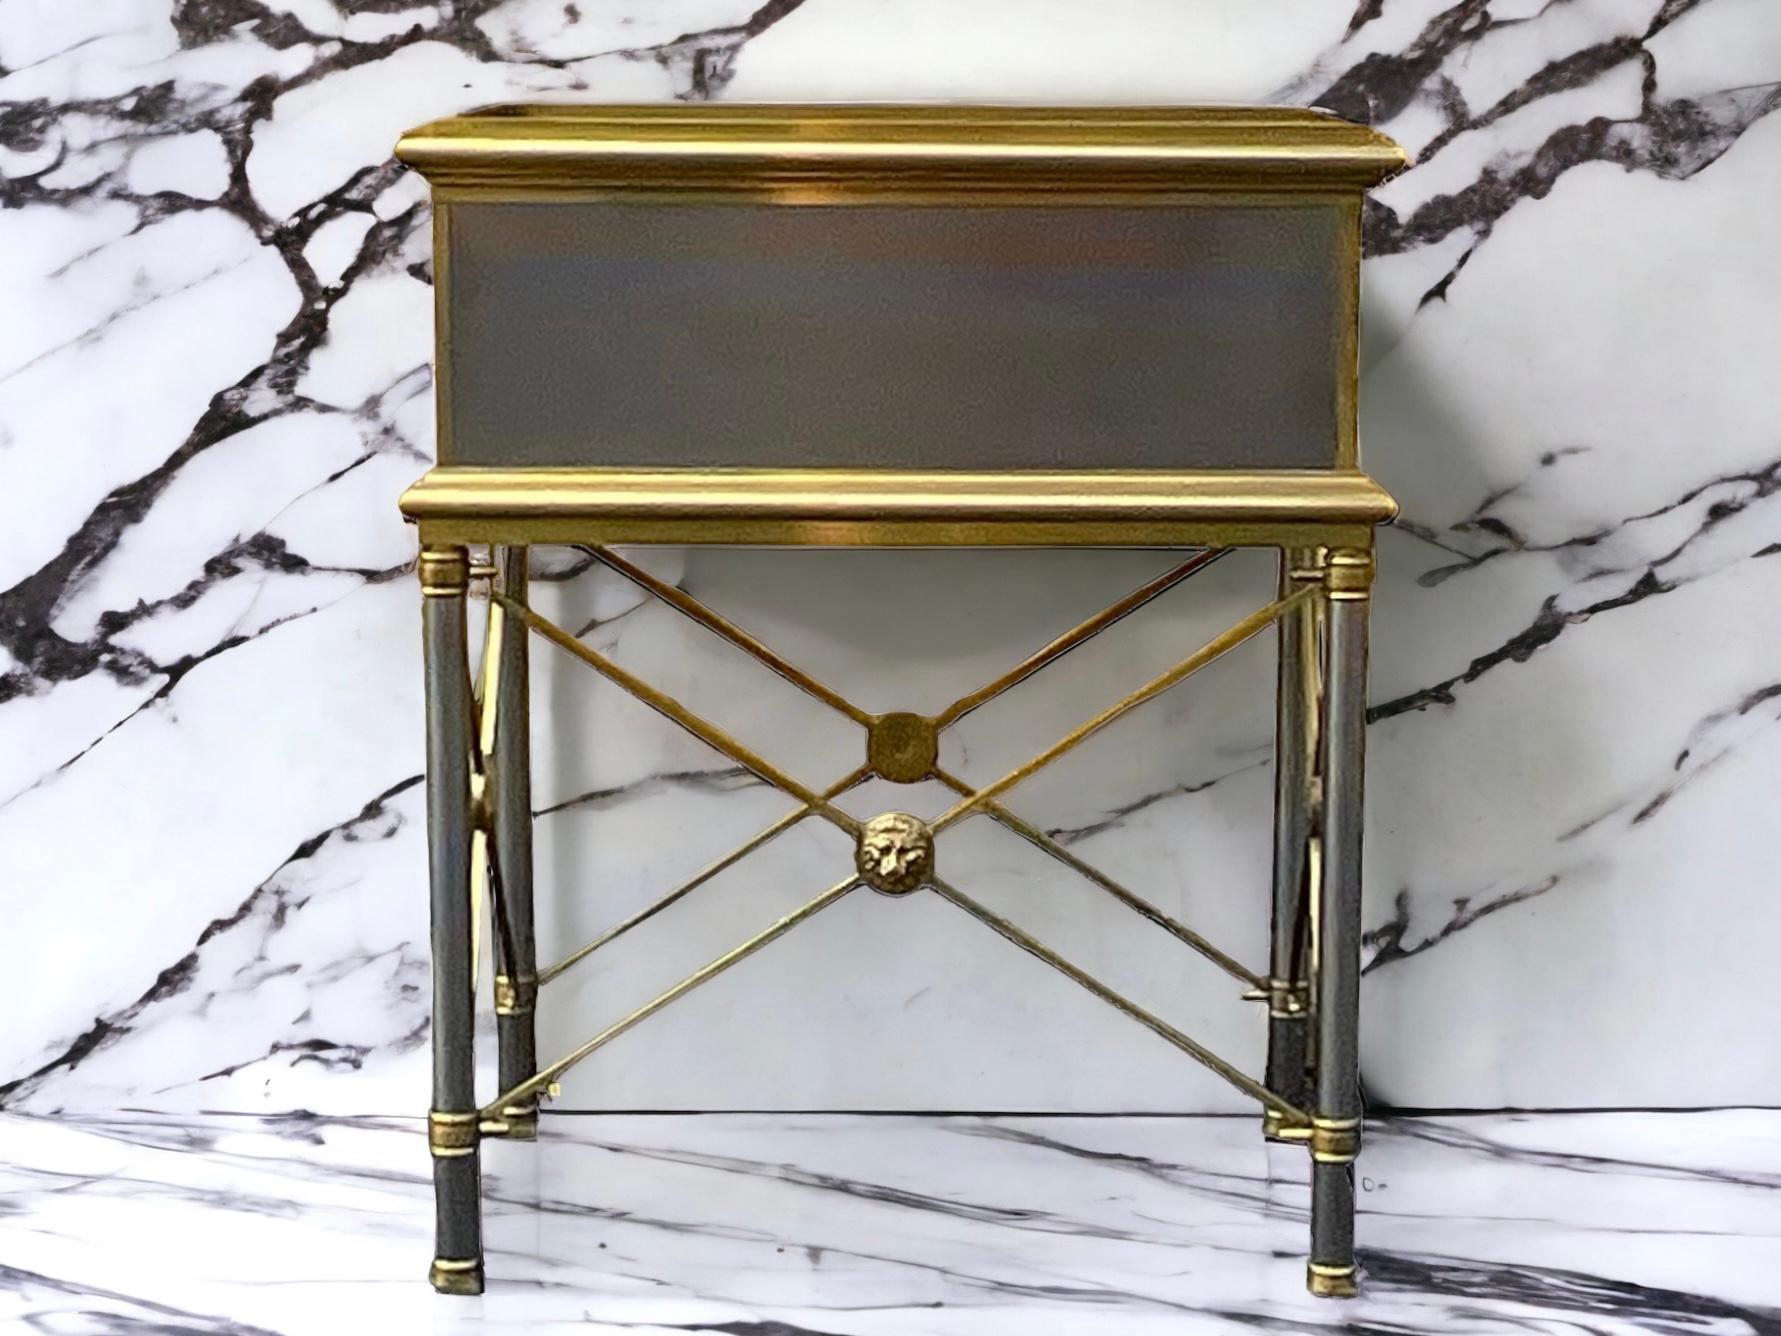 This is a handsome neo-classical Maison Jansen style stainless box on stand or side table with brass accents. The interior is velvet lined. The piece is unmarked and in very good condition.